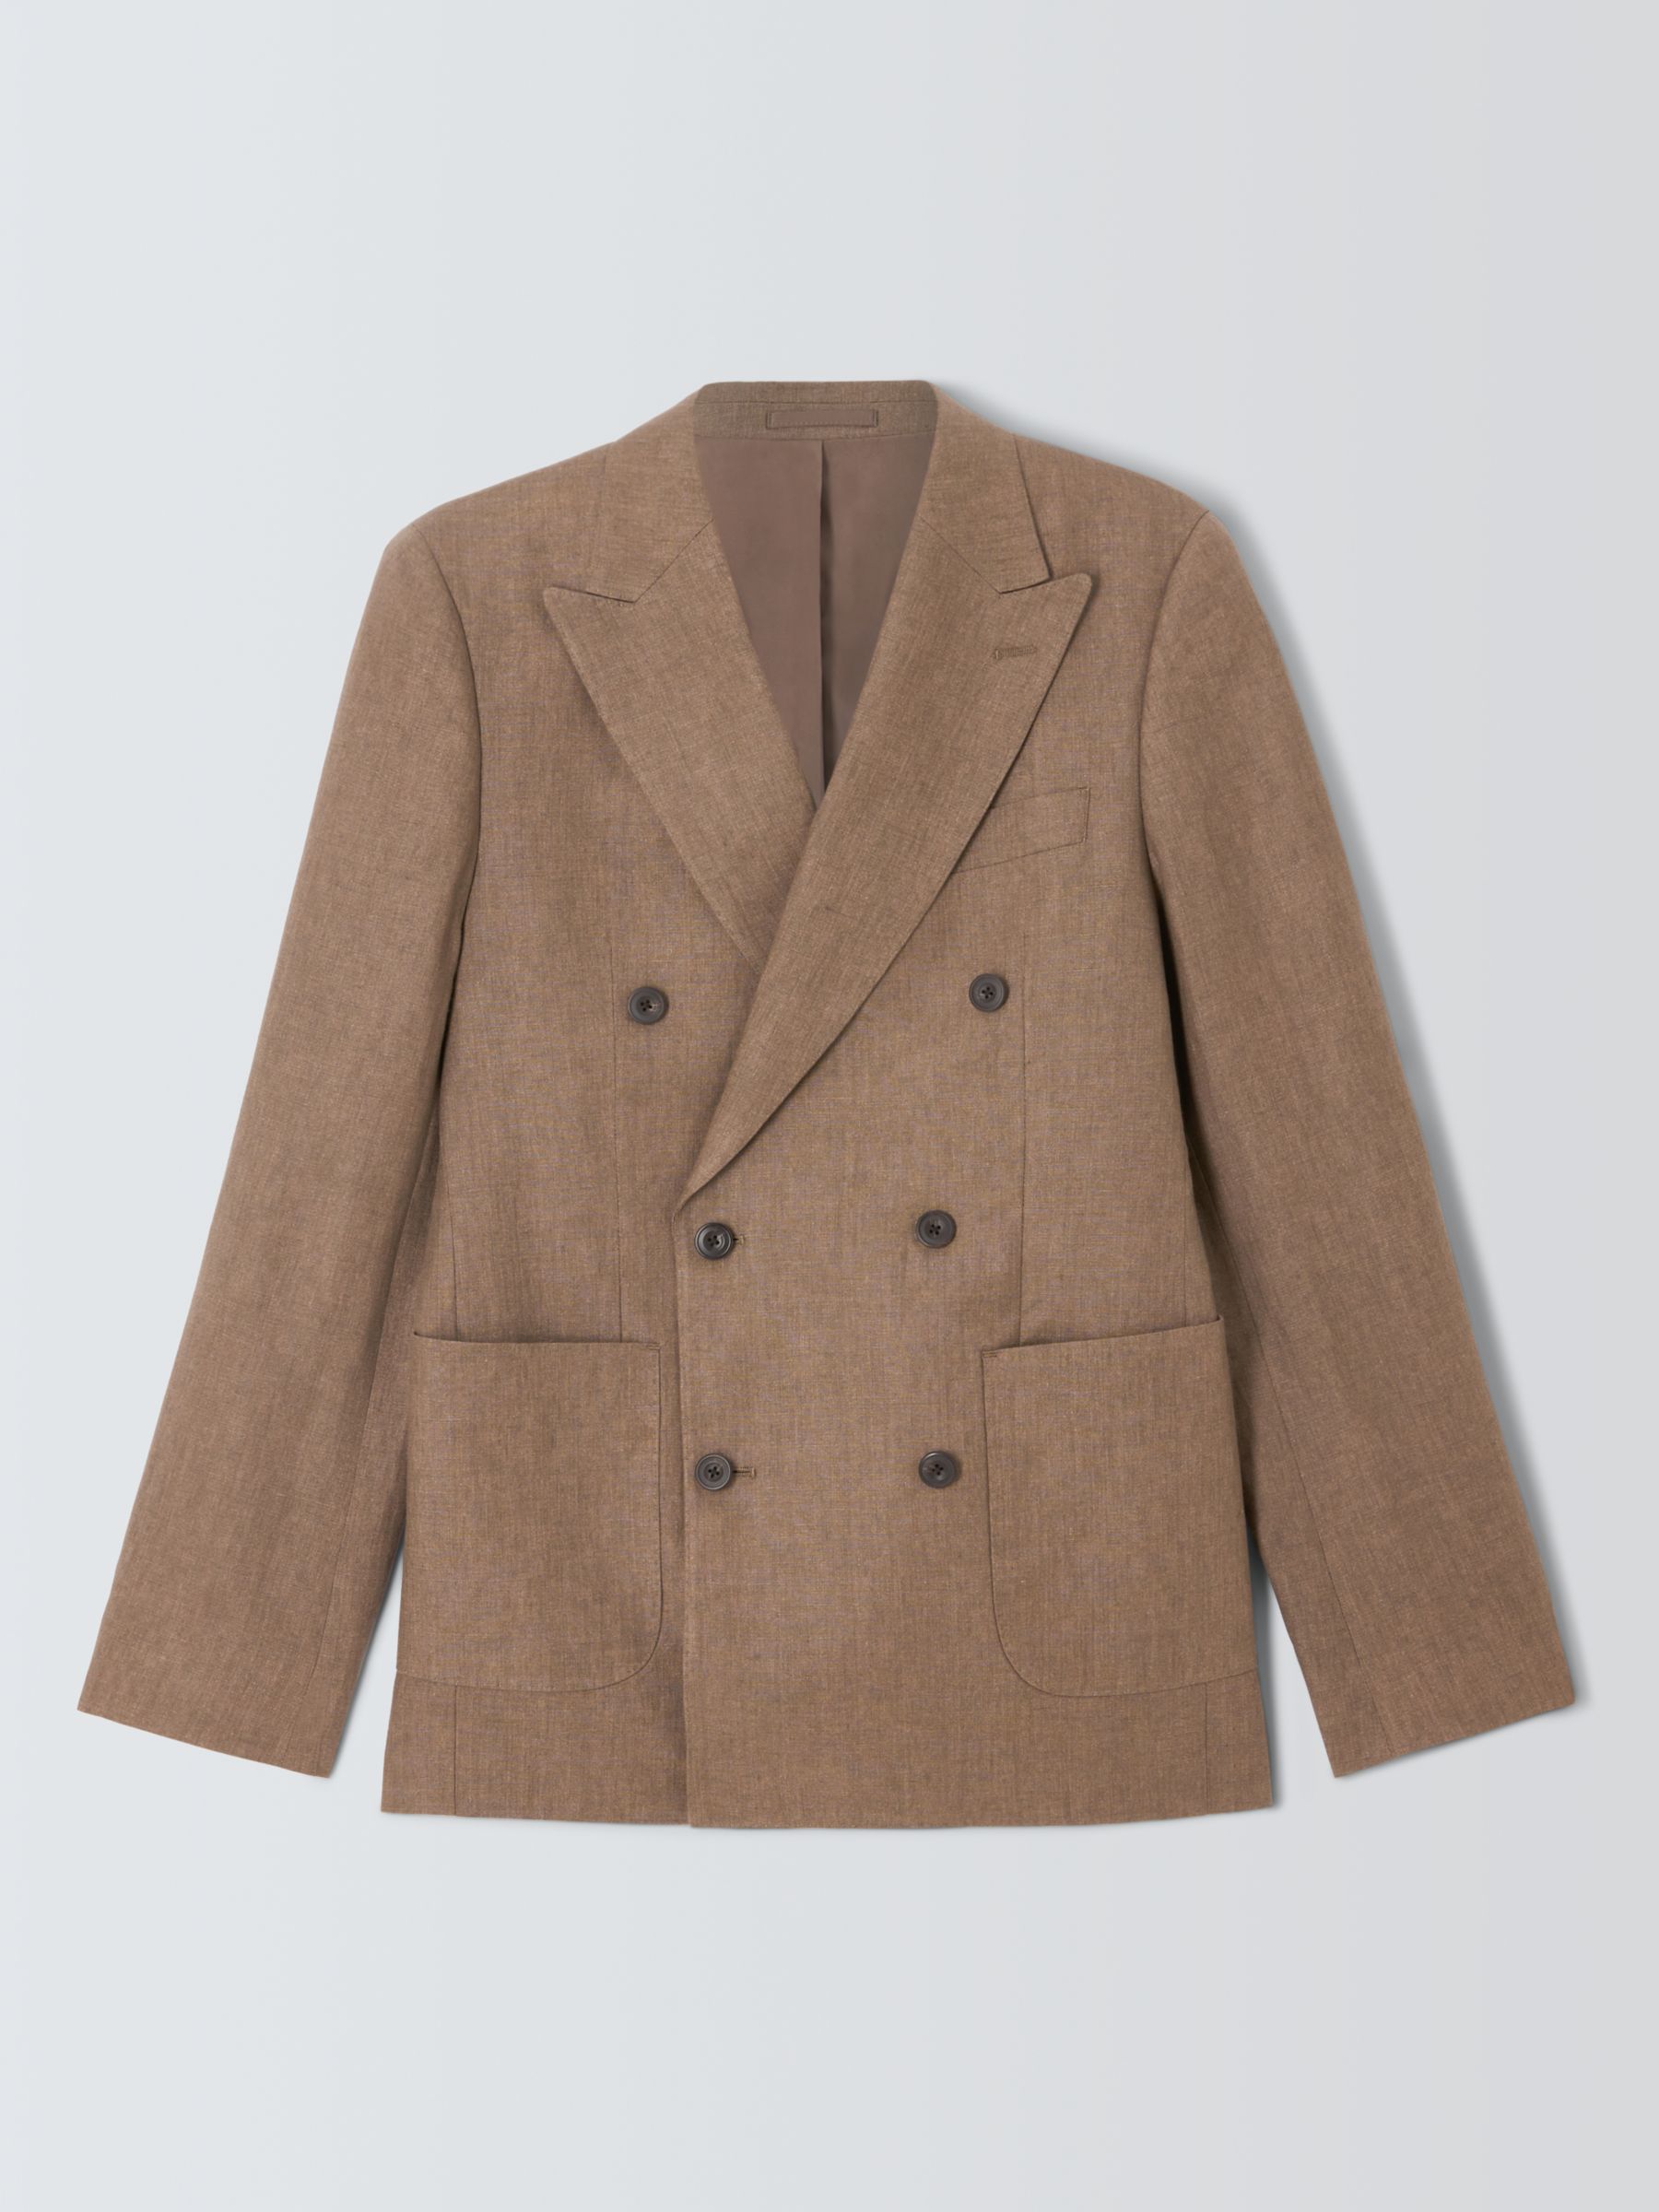 John Lewis Cambridge Regular Fit Double Breasted Suit Jacket, Brown, 40R